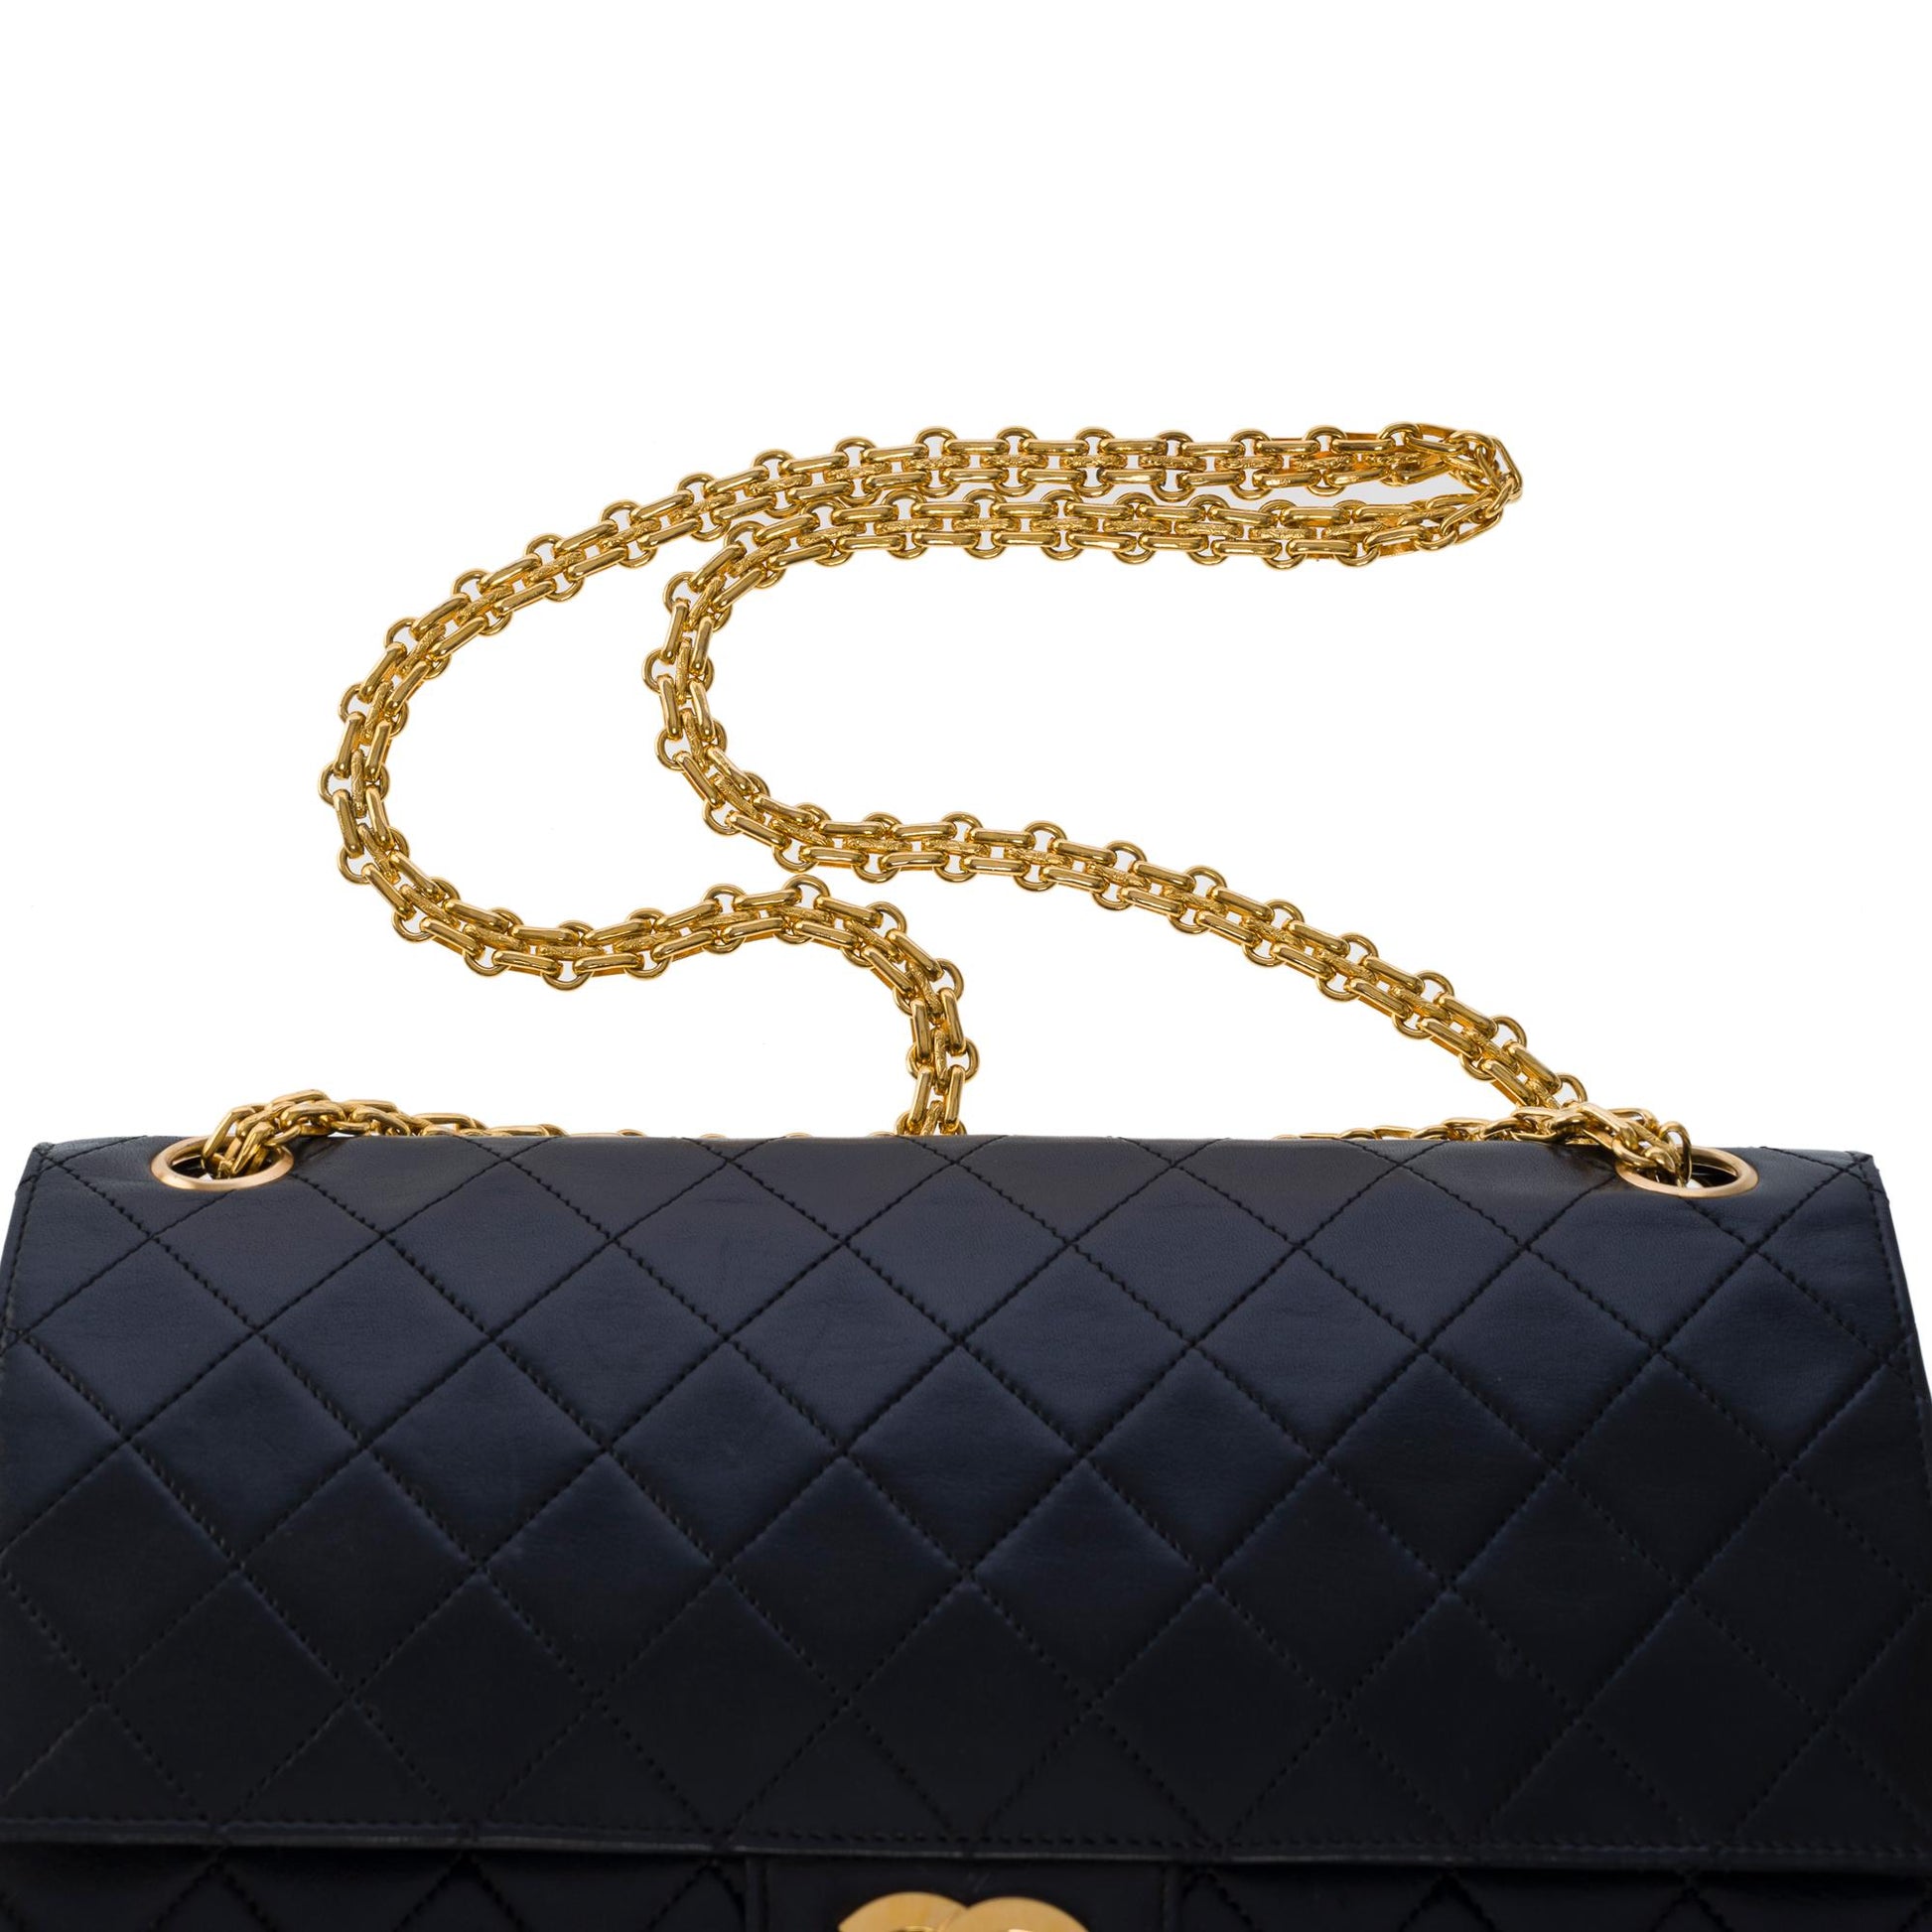 CHANEL Timeless/Classic double flap shoulder bag in black quilted lamb